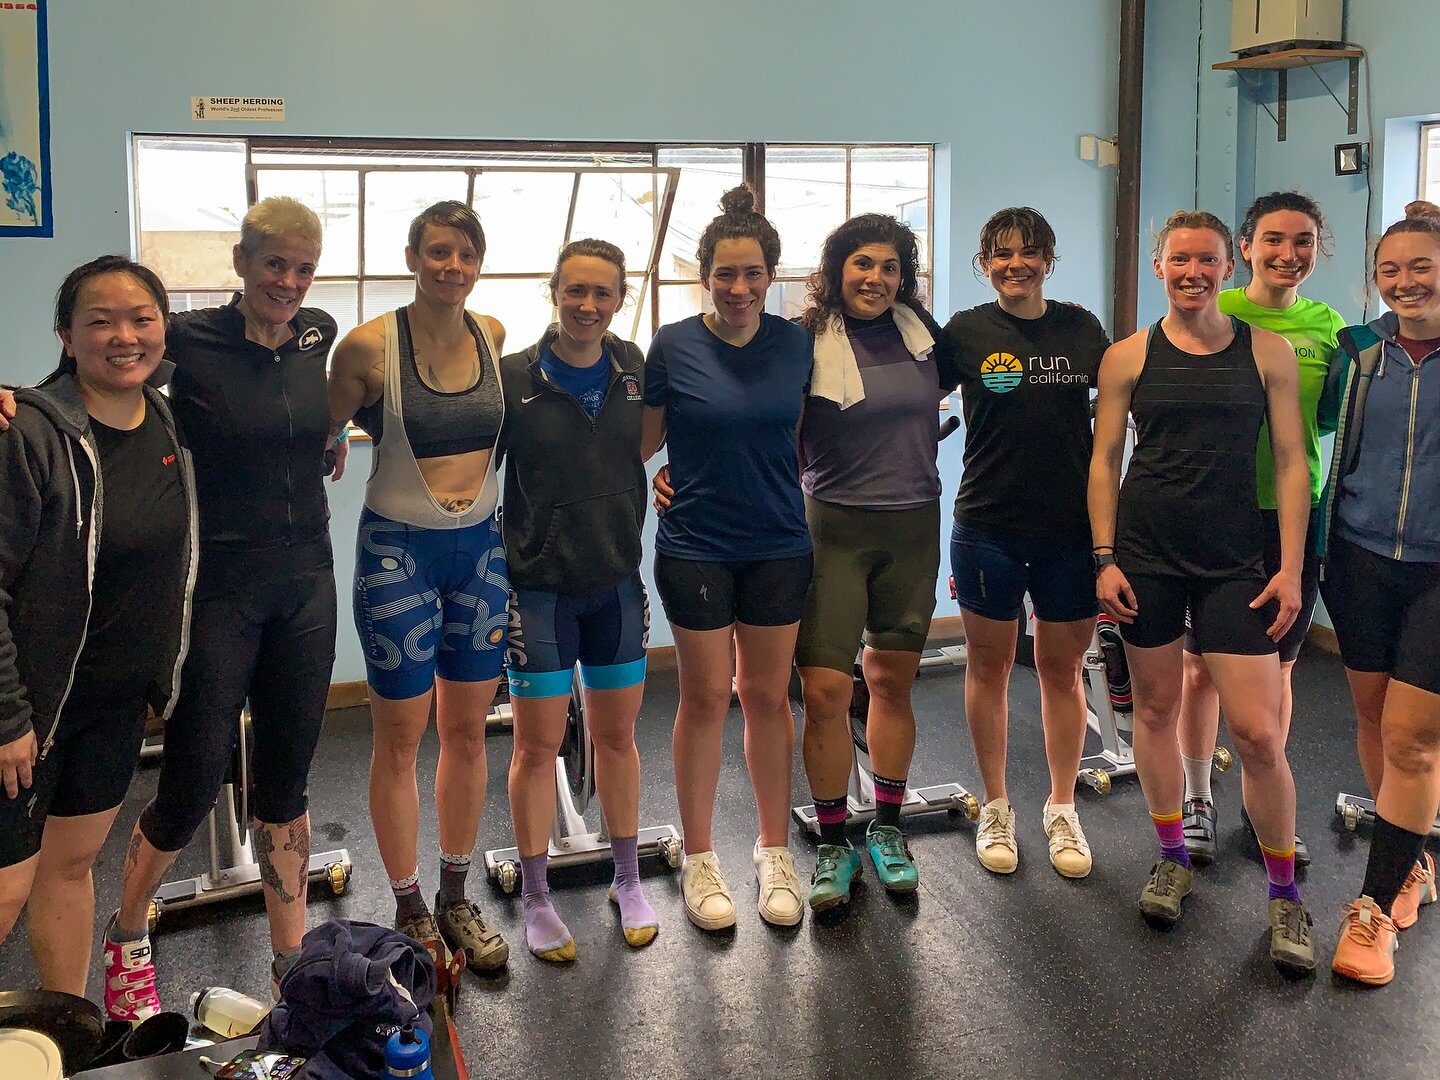 Kicking off the year with a high-energy spin at Berkeley Ironworks, led by the amazing Pat from the former Touchstone Women&rsquo;s Elite team! 🚴&zwj;♀️🌟 

Huge thanks to one of our new sponsors, Touchstone Climbing, for powering our first team rid